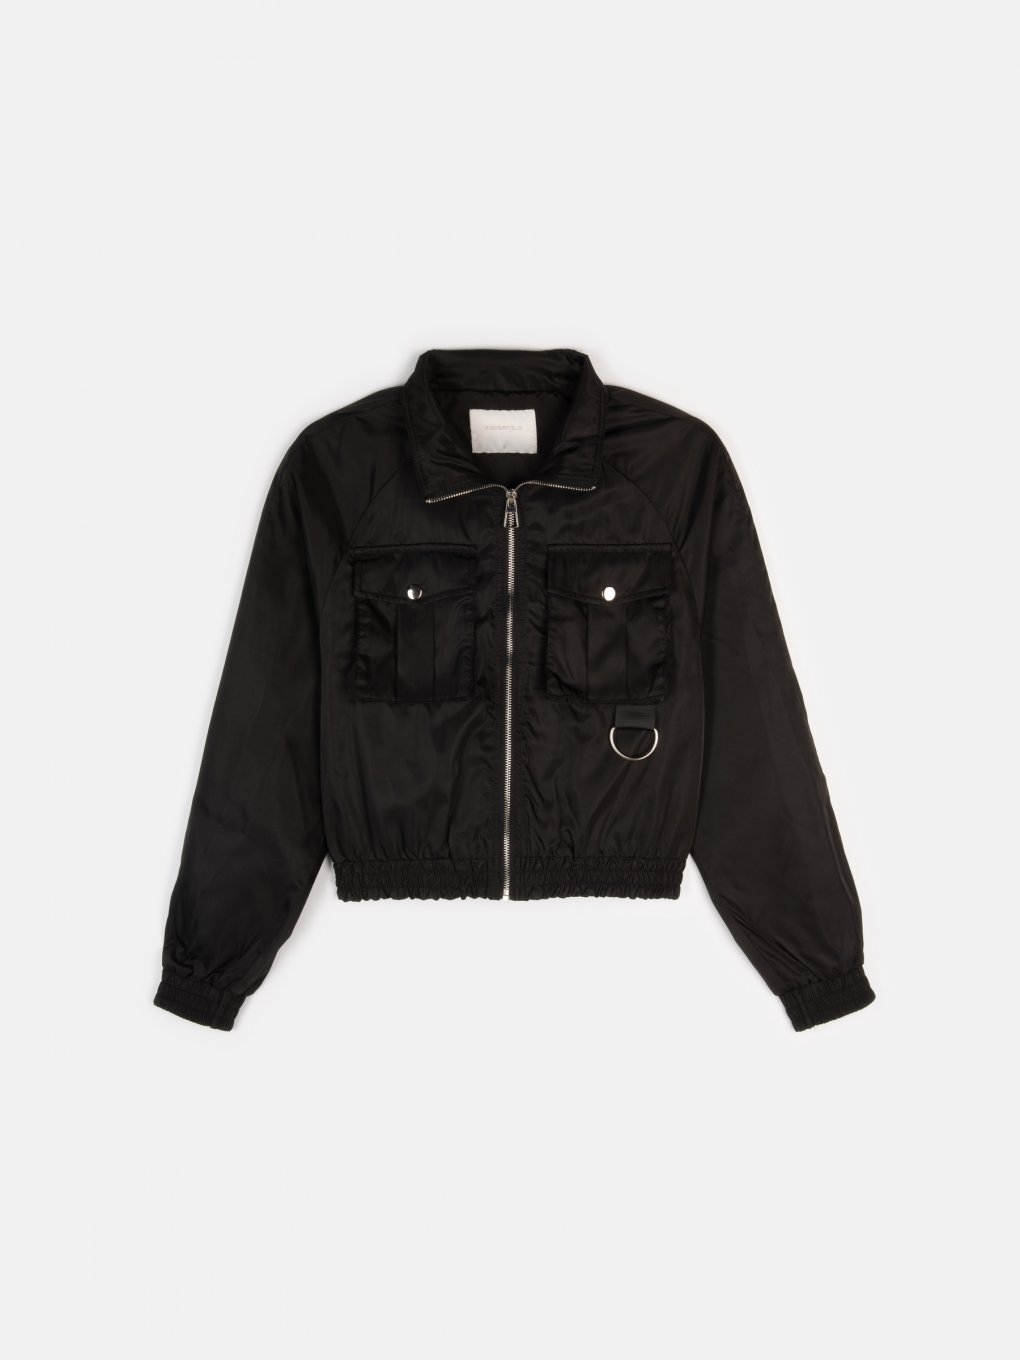 Light bomber jacket with chest pockets